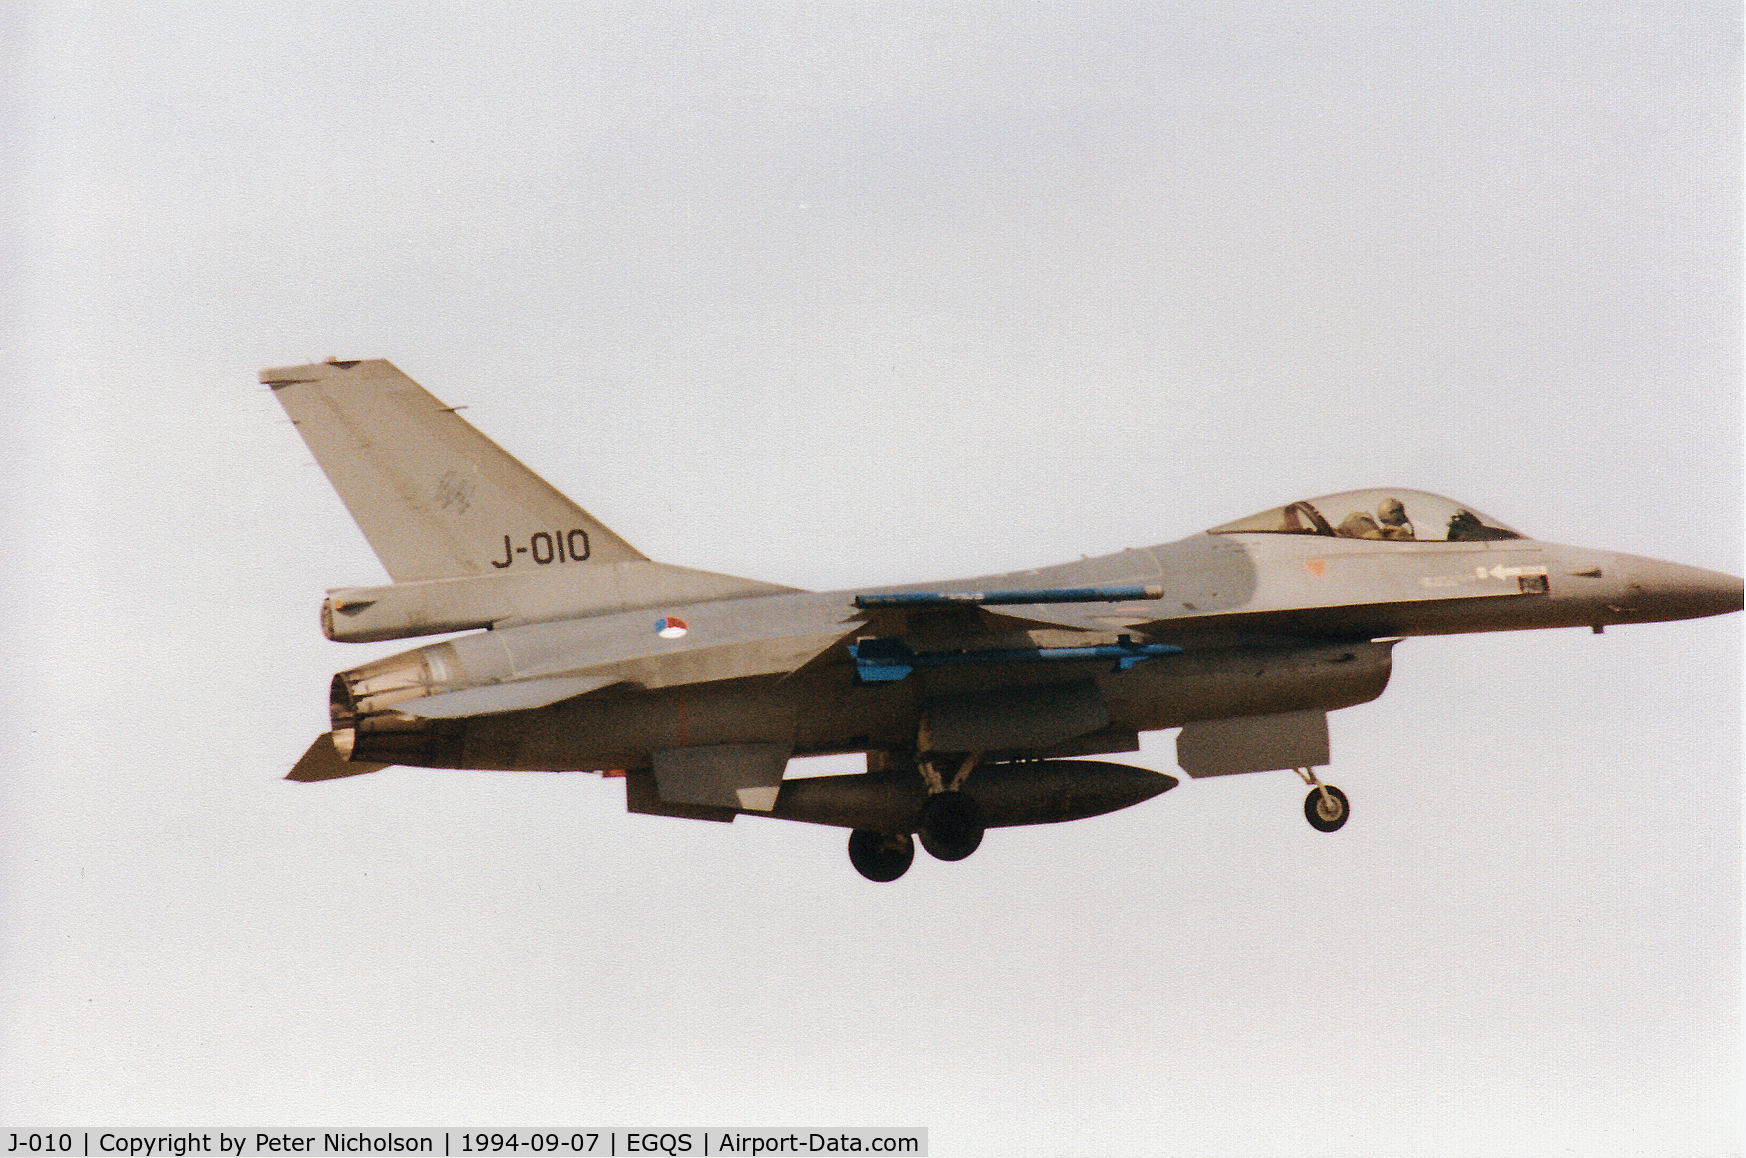 J-010, Fokker F-16A Fighting Falcon C/N 6D-166, F-16A Falcon of 312 Squadron Royal Netherlands Air Force on final approach to RAF Lossiemouth in September 1994.